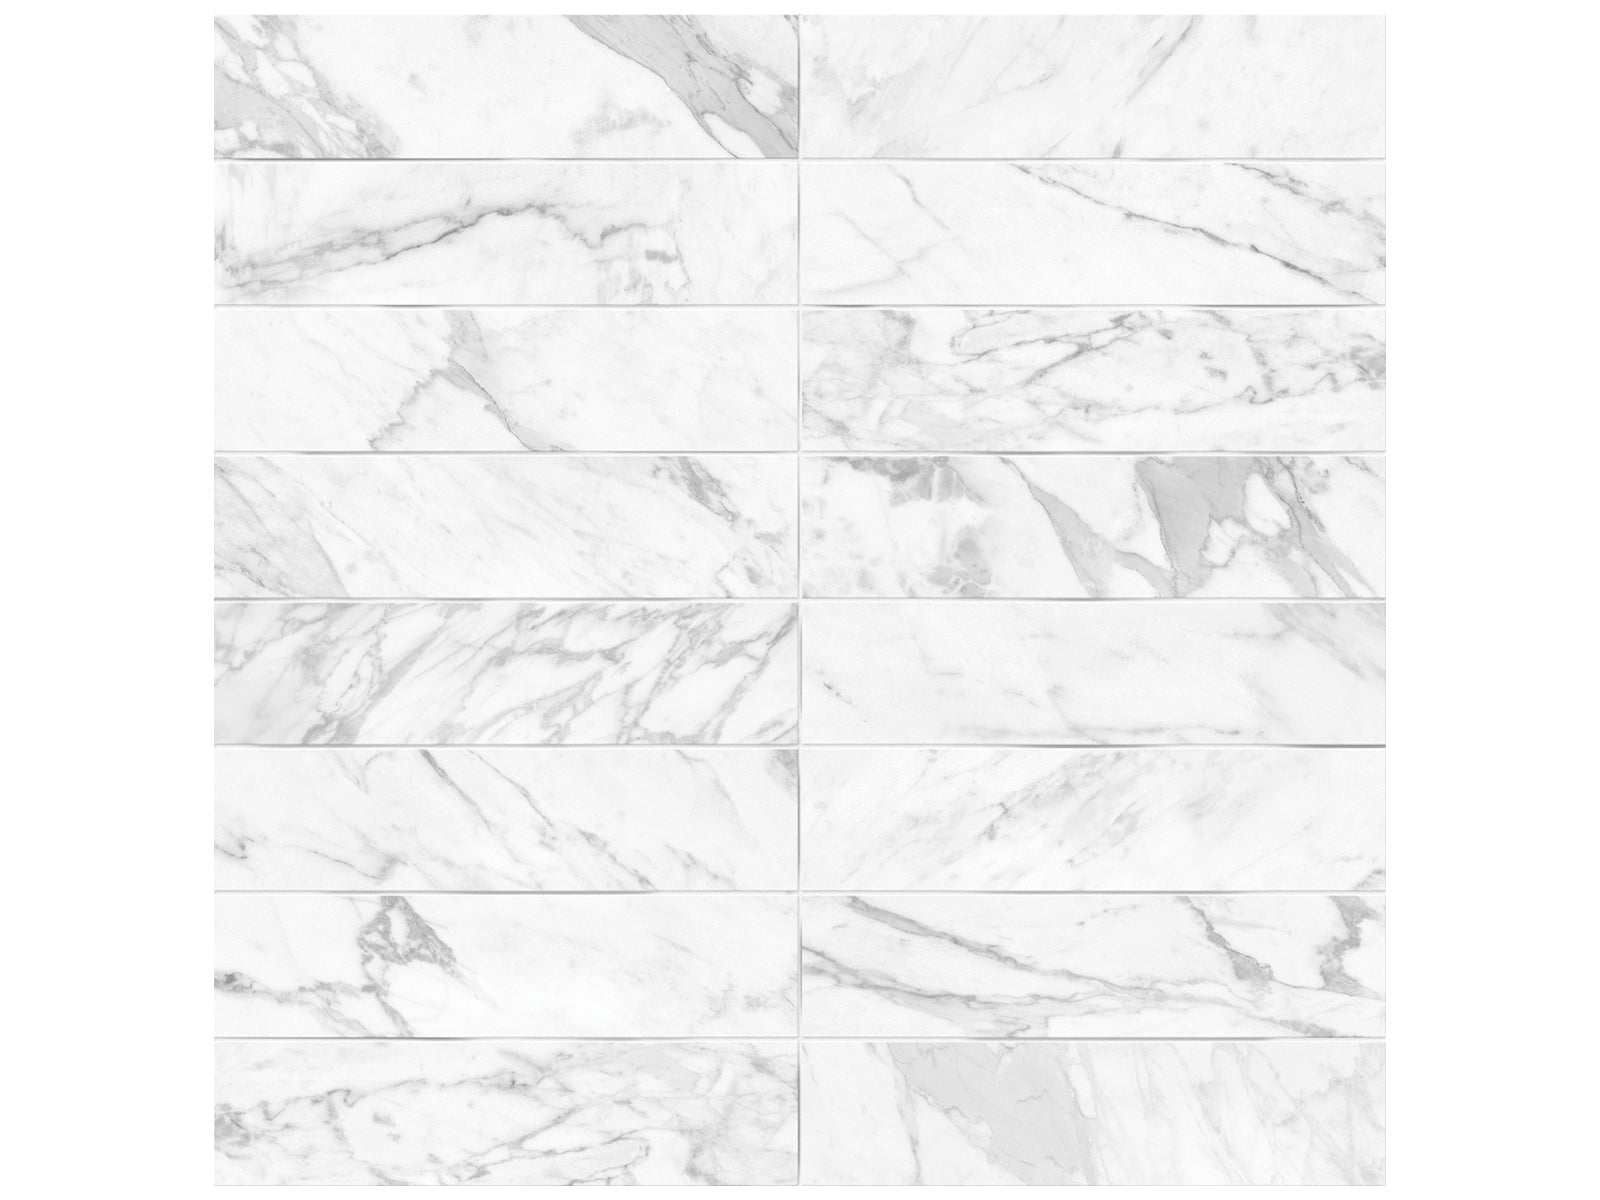 bianco vita embossed pattern glazed ceramic wall tile from raffino anatolia collection distributed by surface group international matte finish pressed edge 3x12 rectangle shape